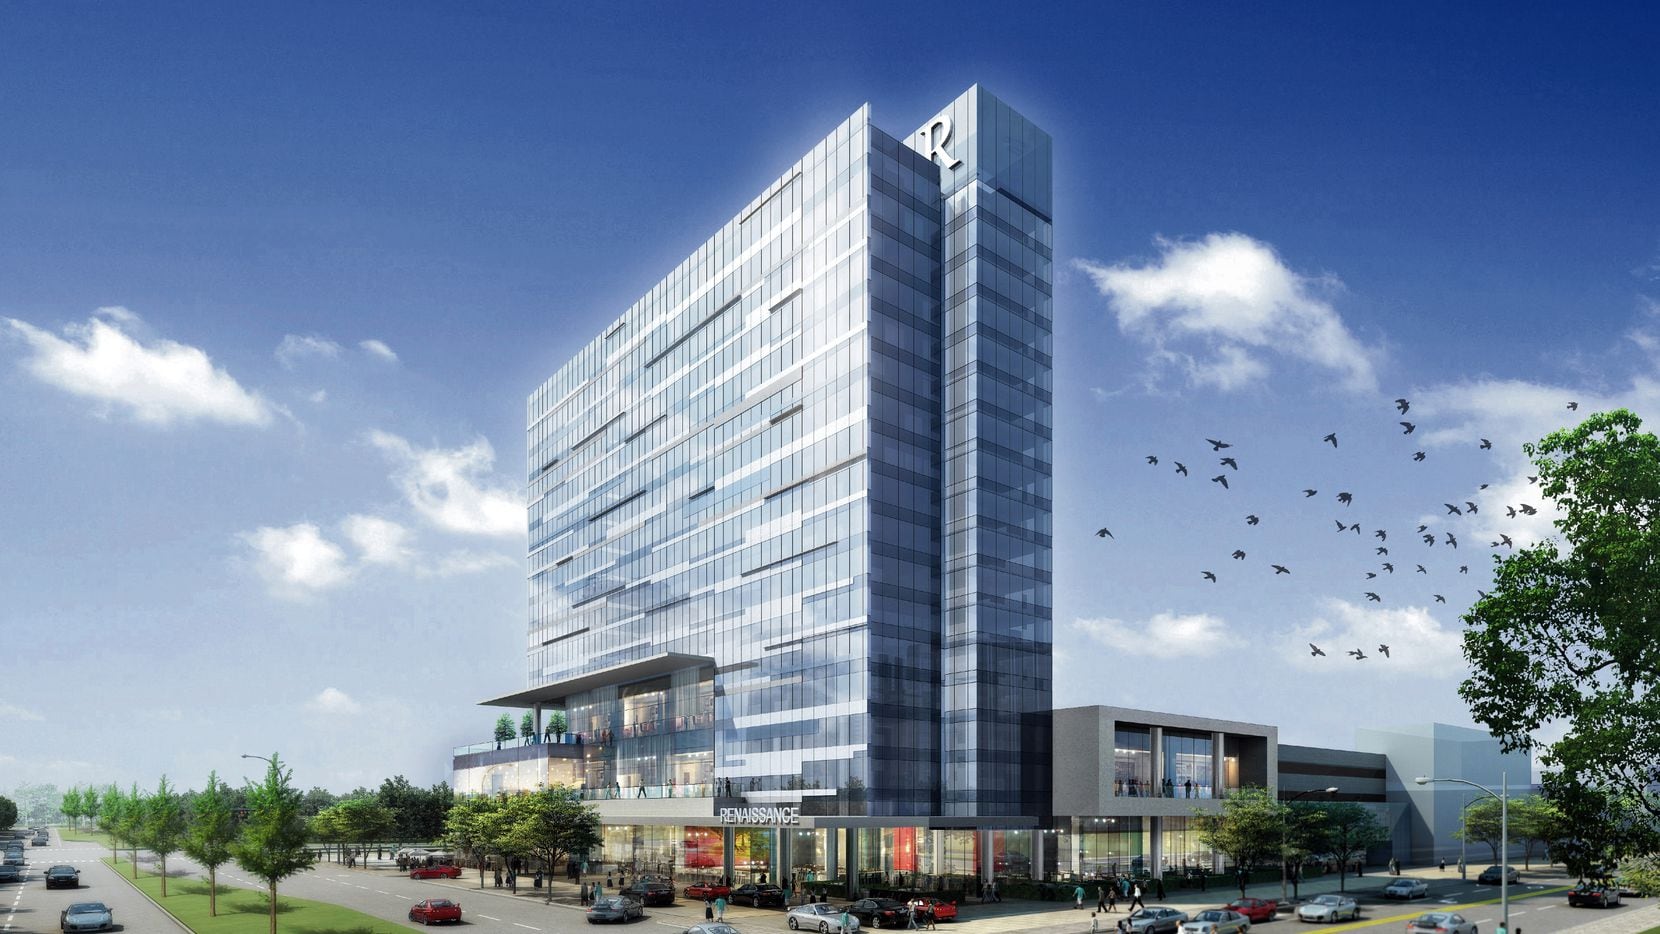 The $82 million Renaissance Hotel will open next summer in Legacy West.